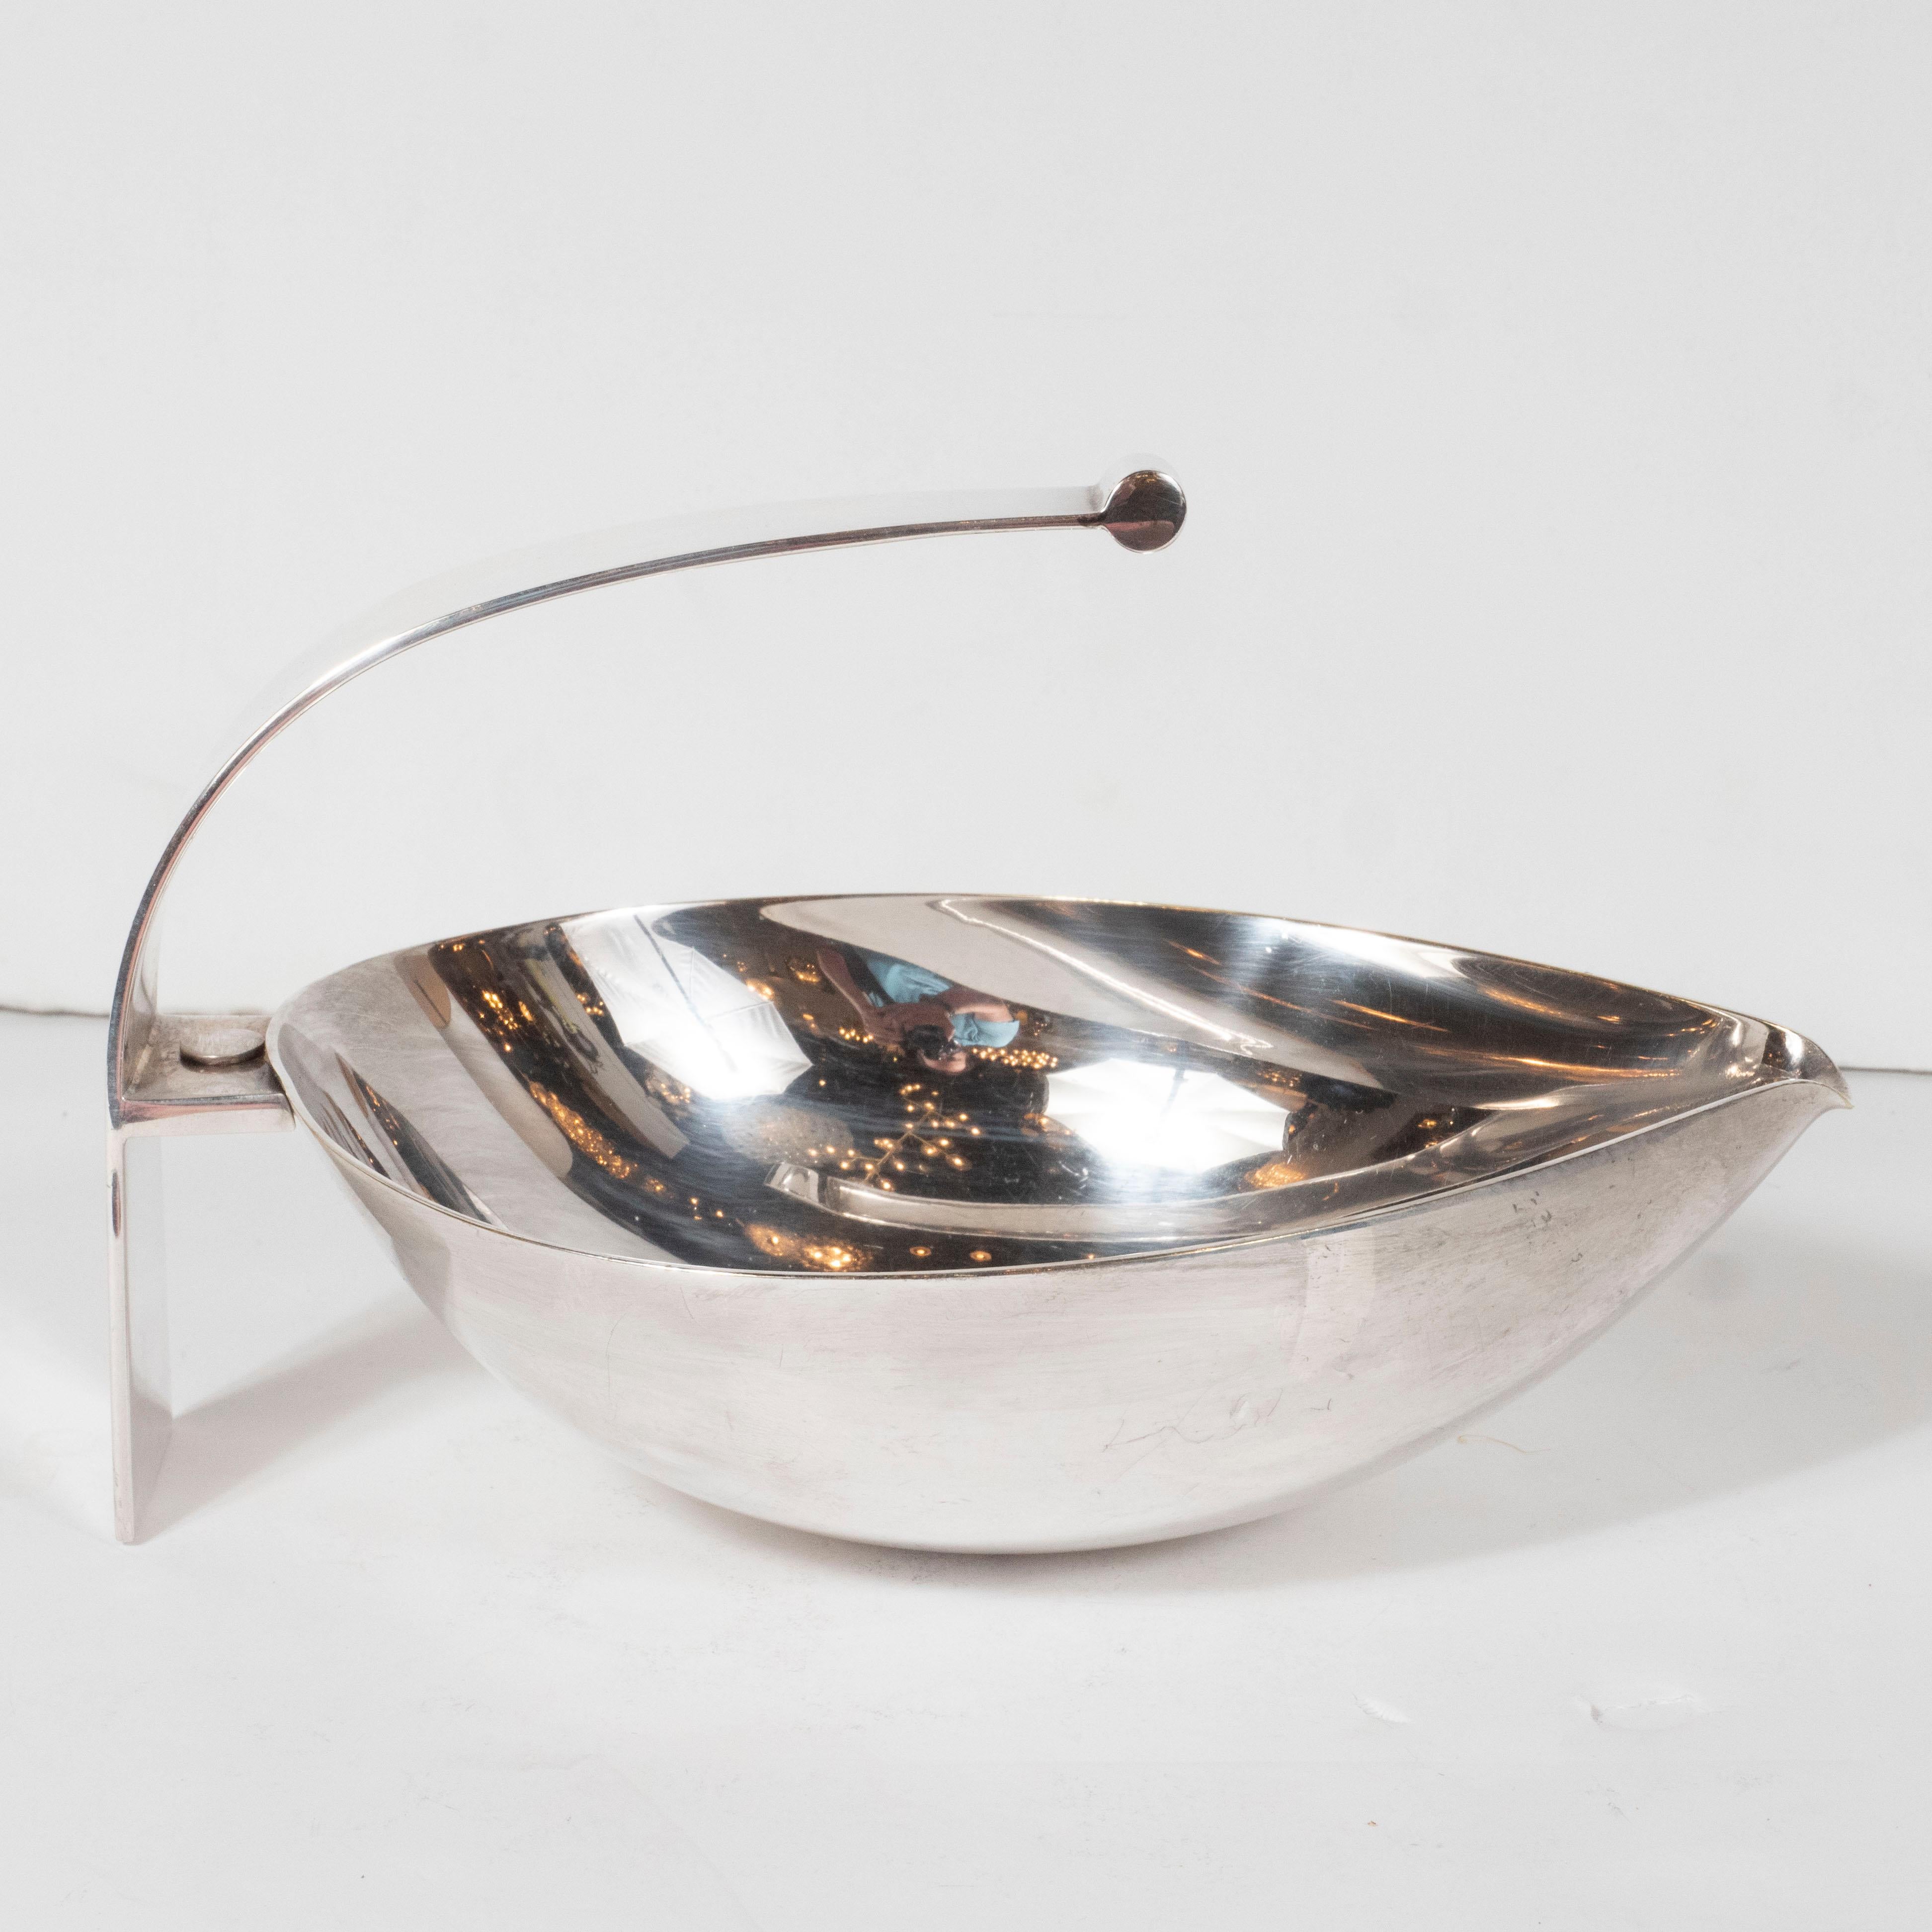 Italian Mid-Century Modern Cantilevered Silverplated Decorative Dish Signed Mesa 4